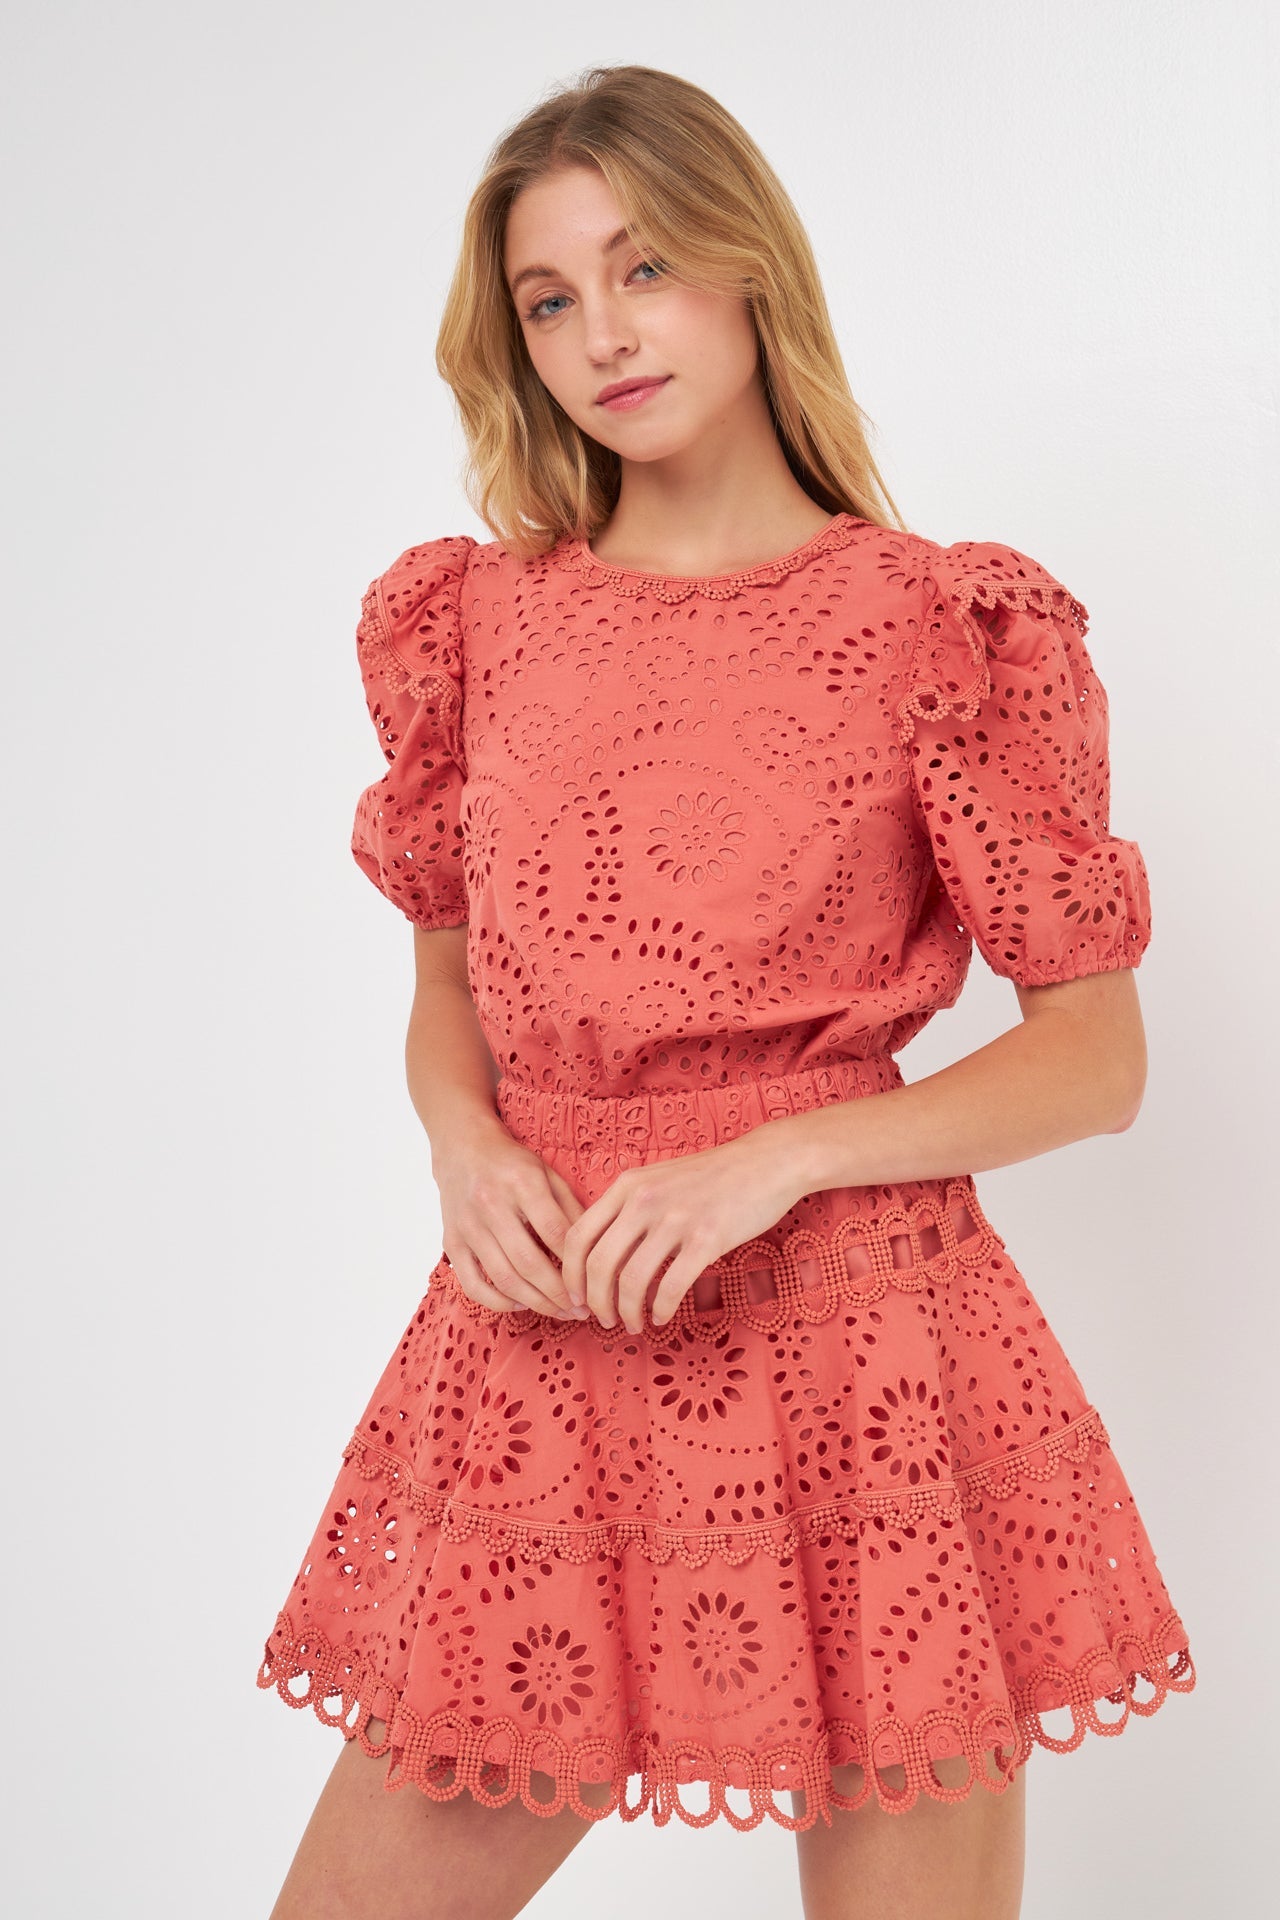 FREE THE ROSES - Lace Puff sleeve blouse - TOPS available at Objectrare